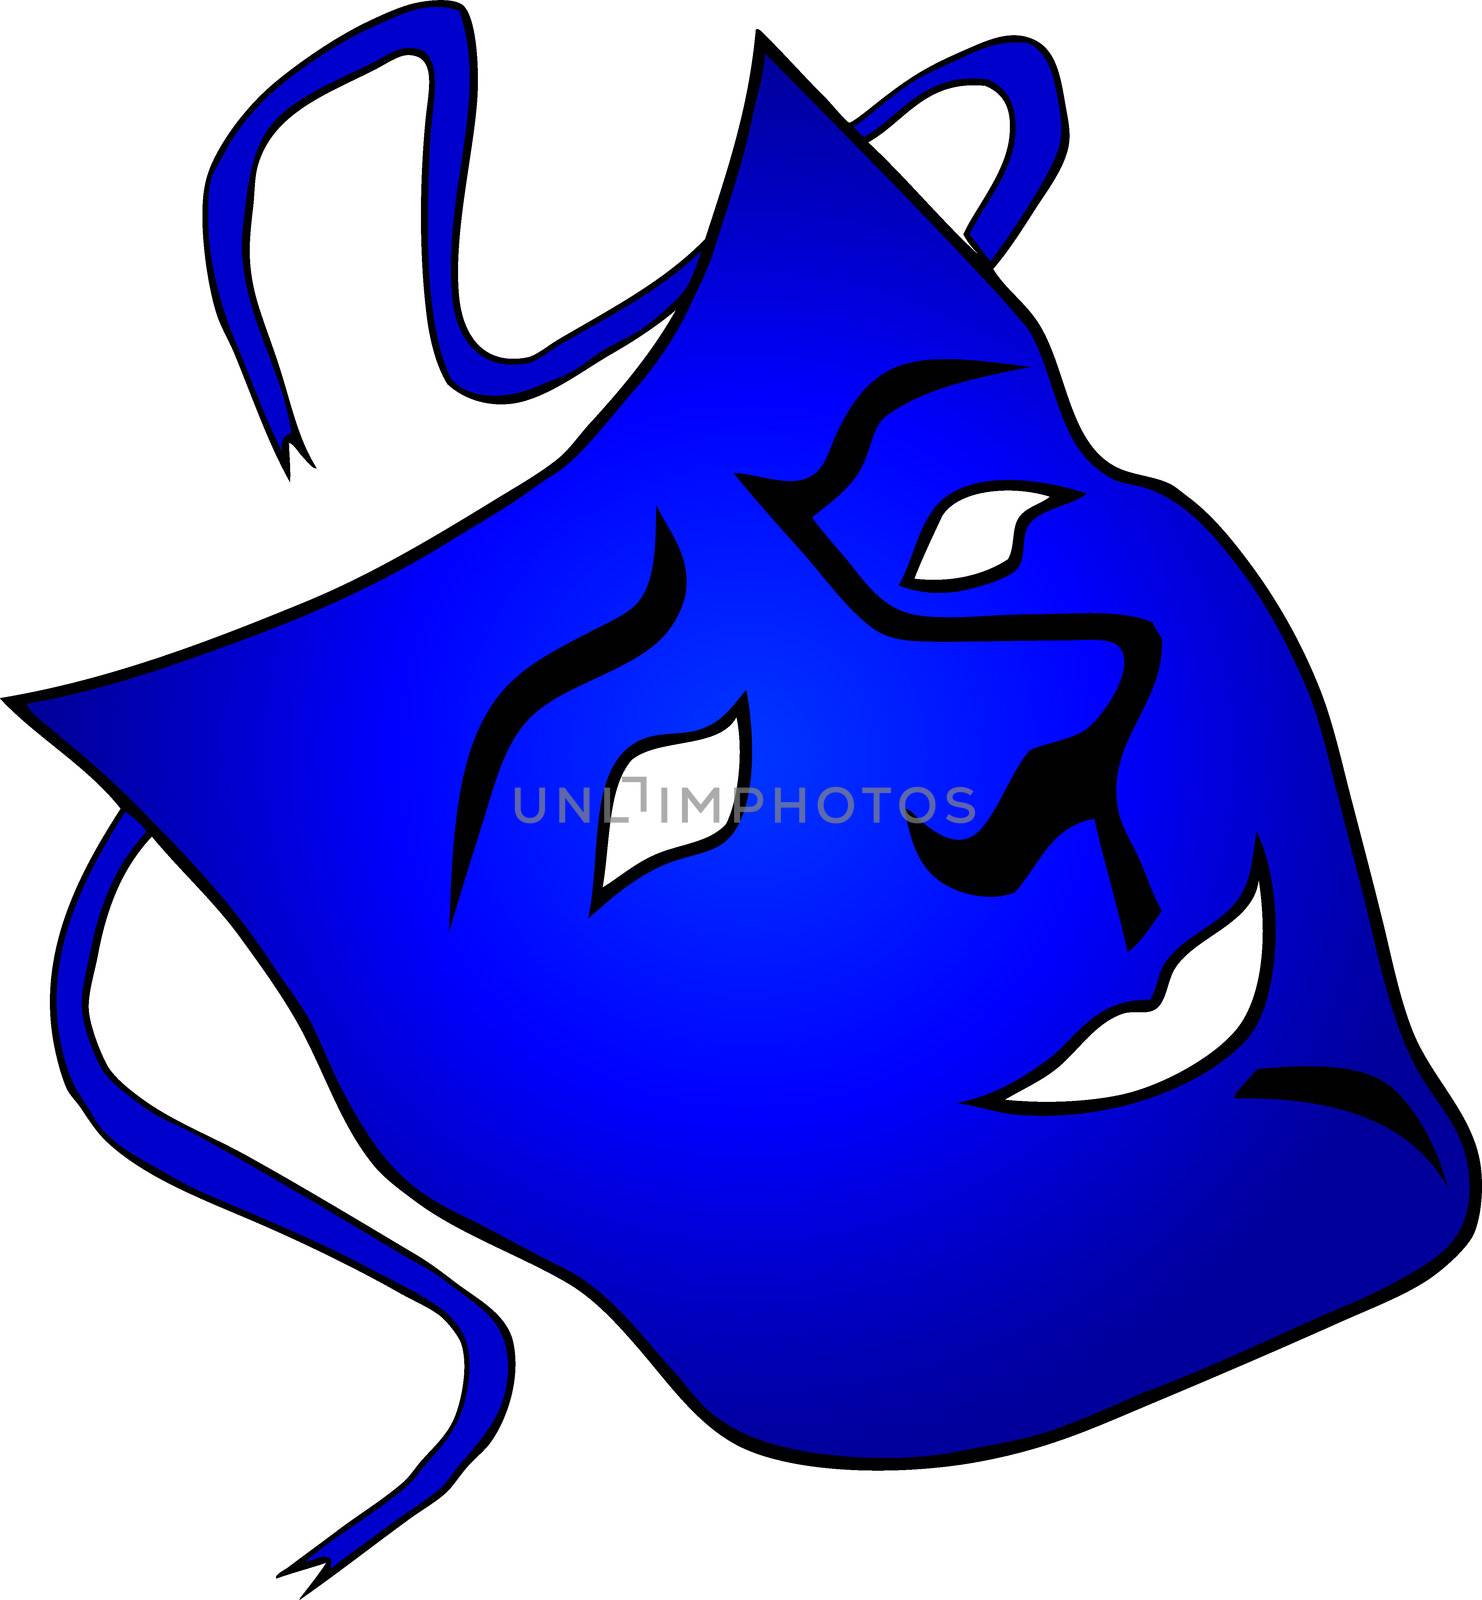 blue carnival mask by peromarketing